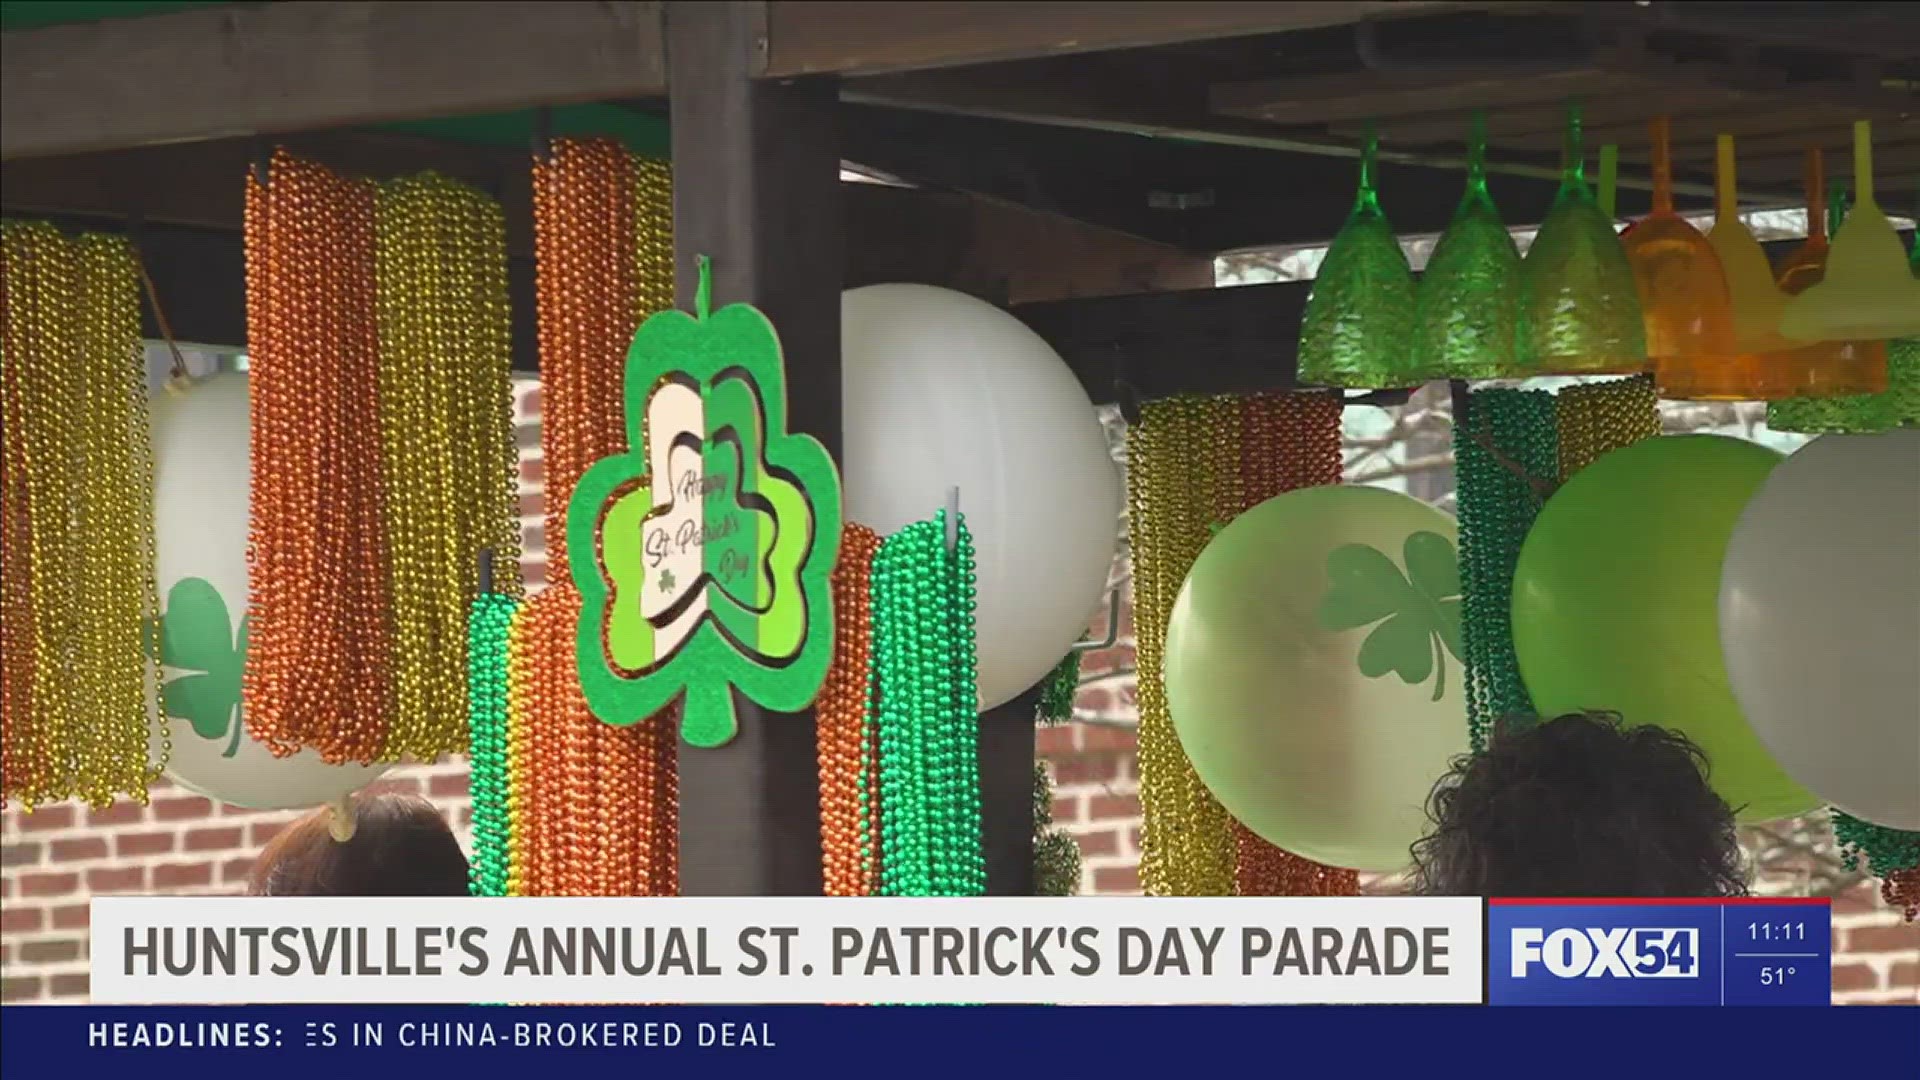 The Huntsville St. Patrick's Day Parade featured music, floats, beads, and hopefully some good luck.